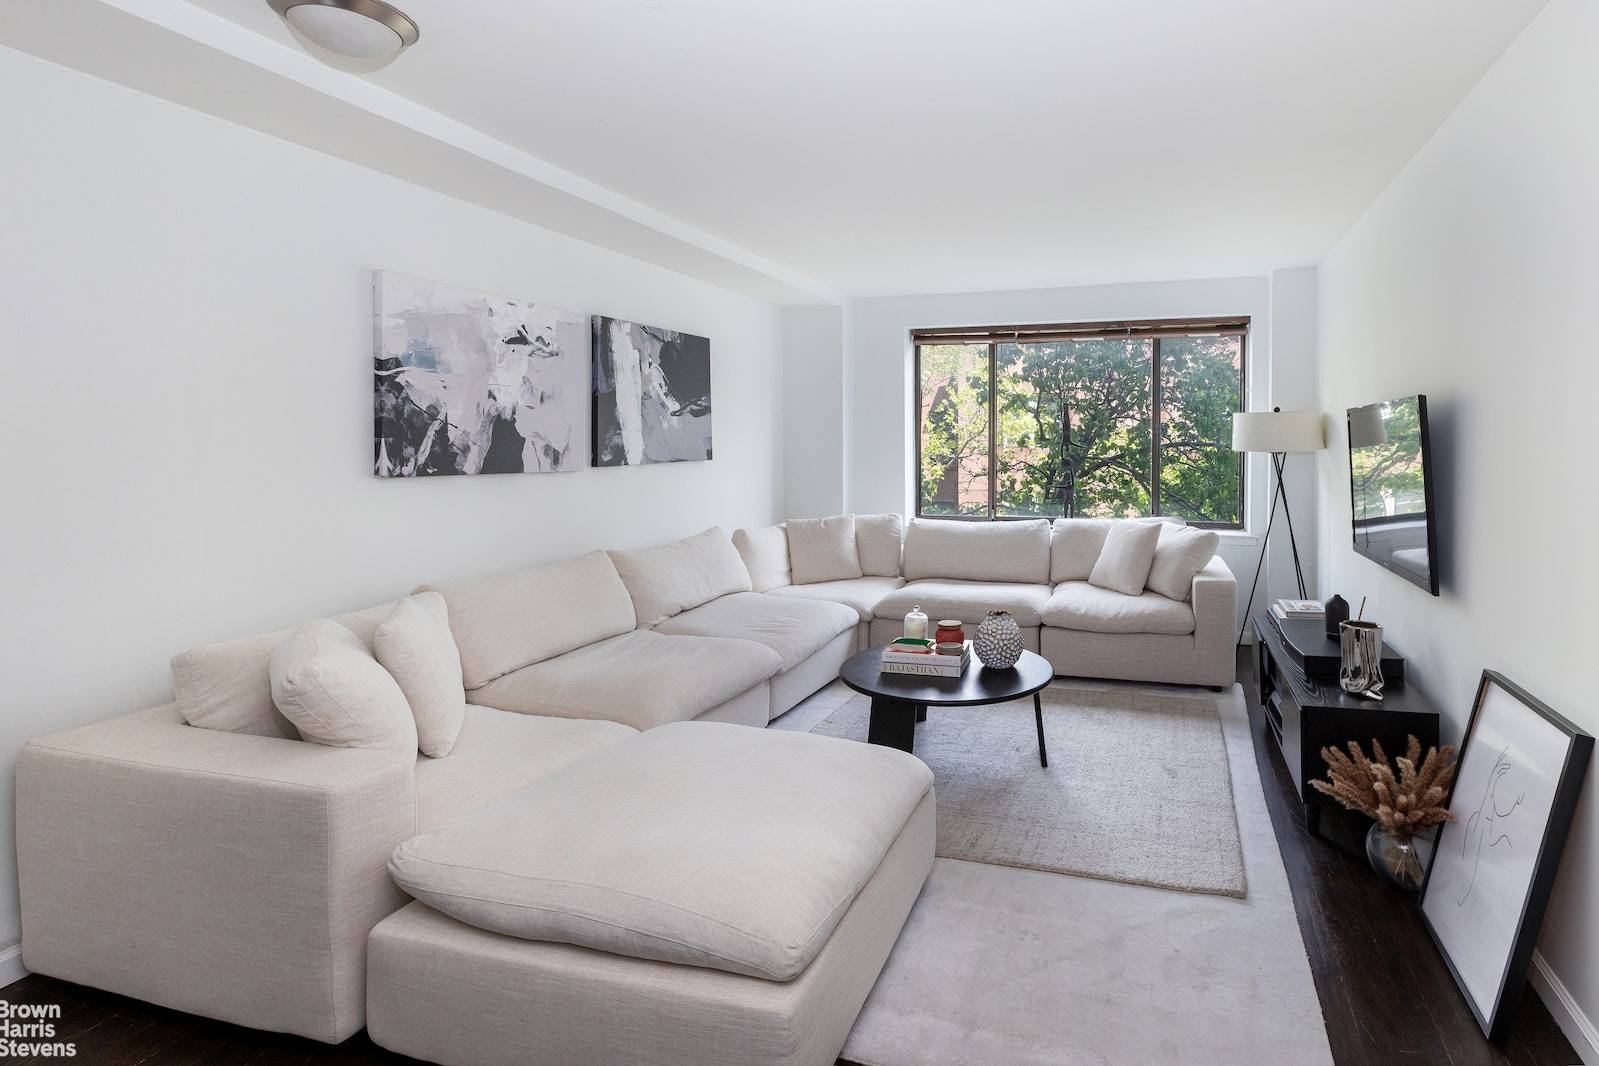 Welcome to unit 4B at 250 East 31st Street Condominium.